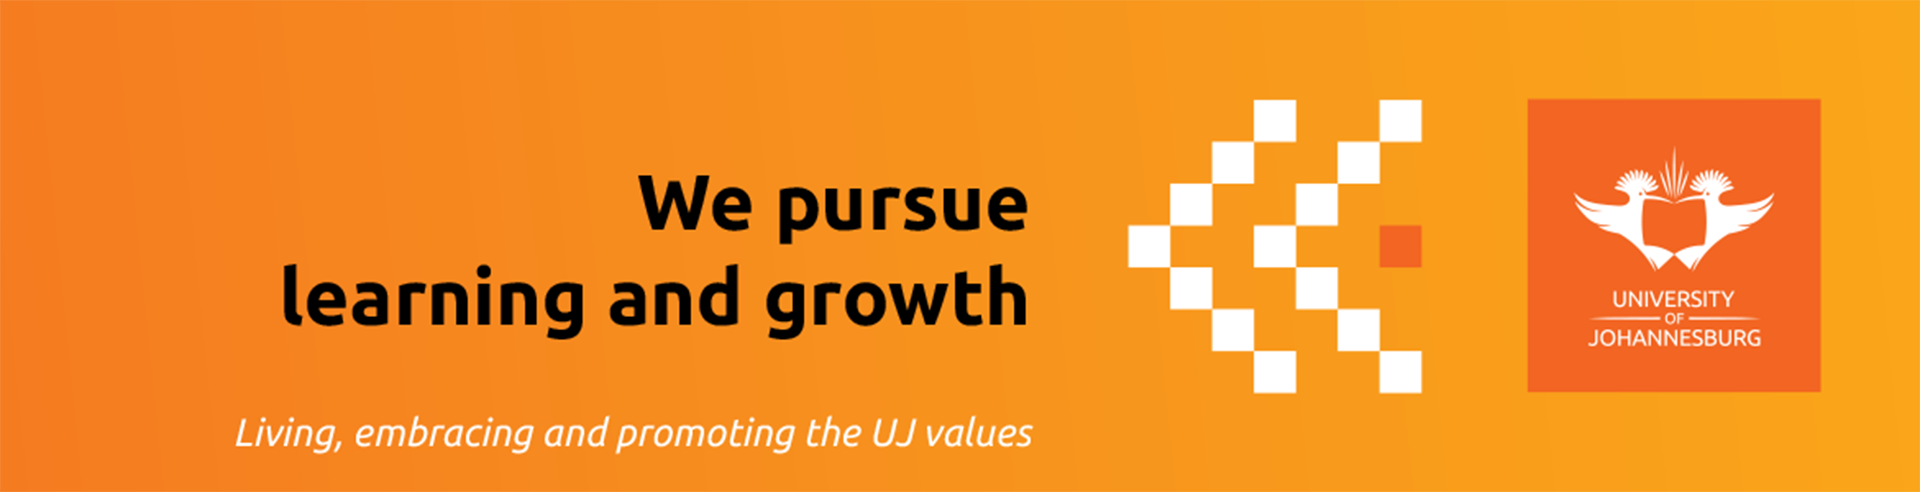 Uj Values Expressions Posters 2020 Ulink 1170x300mm 35